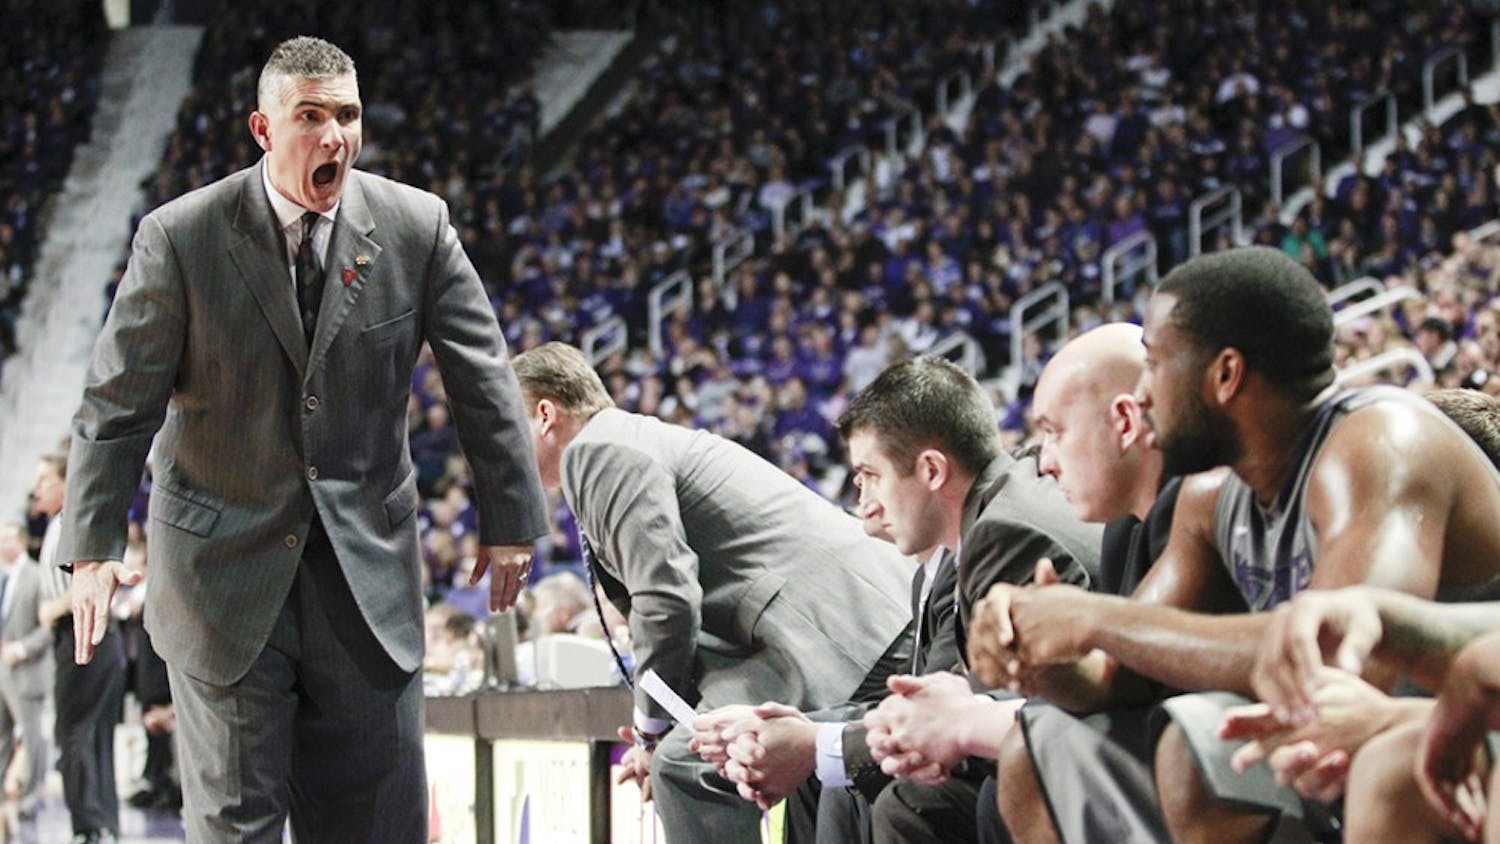 Kansas State coach Frank Martin yells at his bench during action against Texas A&amp;M in the second half at Bramlage Coliseum on Saturday, February 4, 2012, in Manhattan, Kansas. K-State pulled out a 64-53 victory. (Travis Heying/Wichita Eagle/MCT)